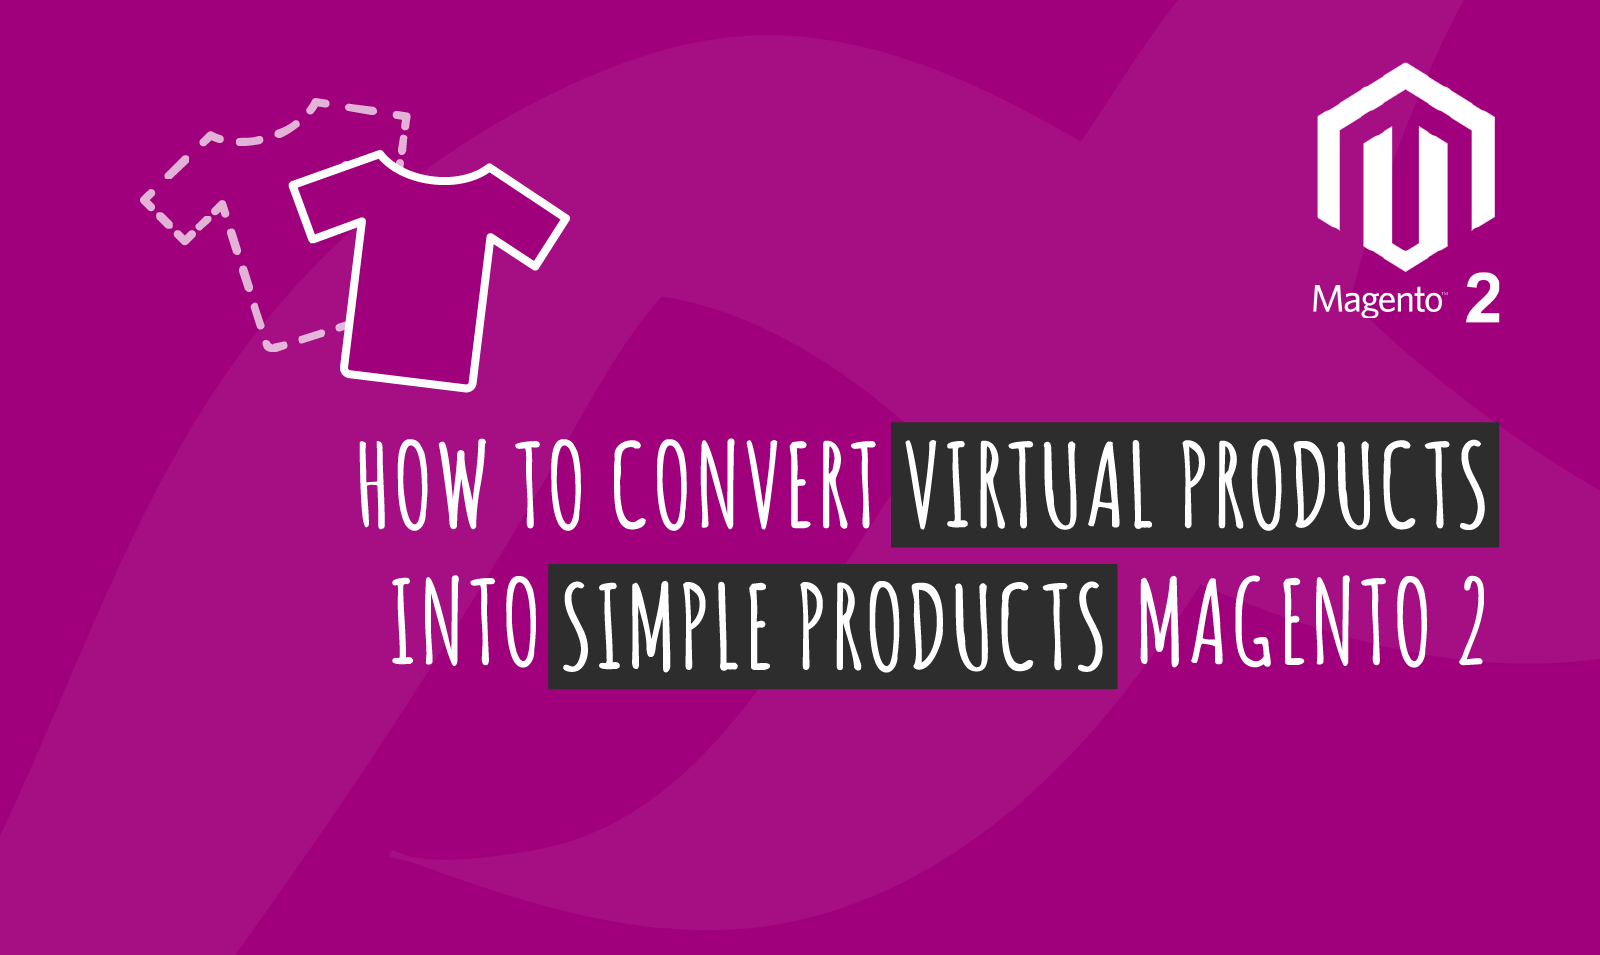 HOW TO CONVERT VIRTUAL PRODUCTS INTO SIMPLE PRODUCTS MAGENTO 2